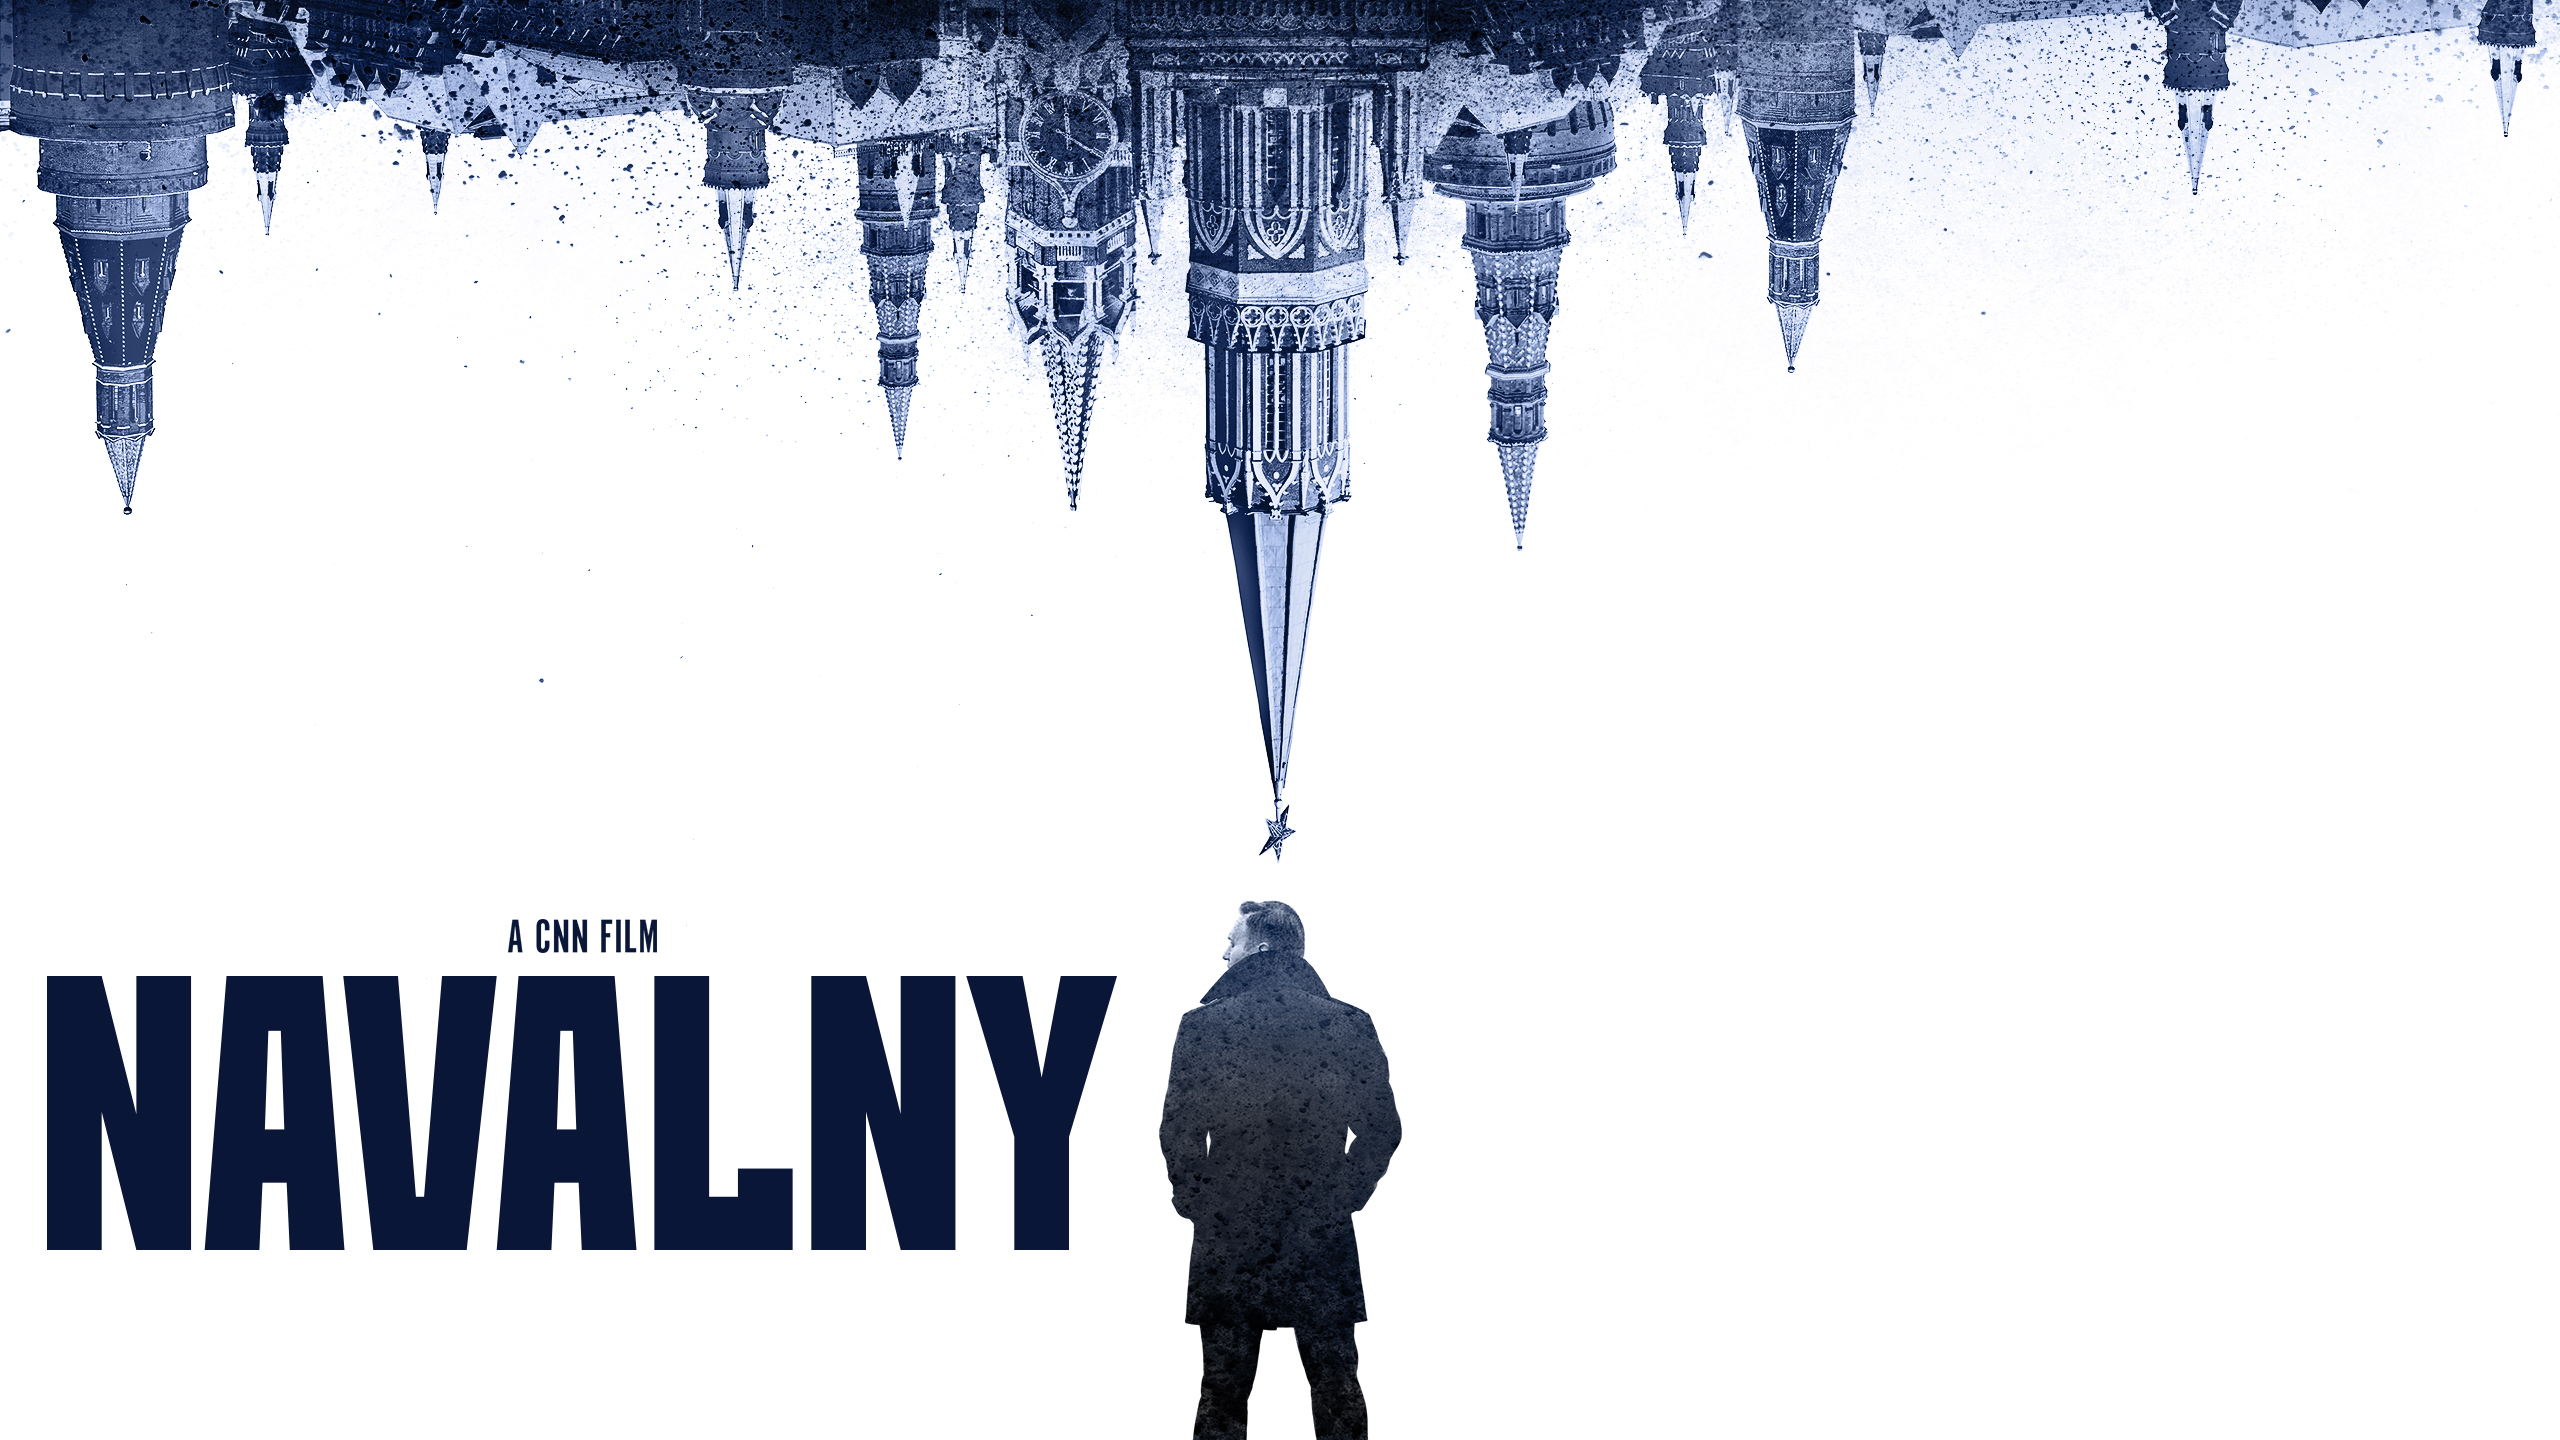 Navalny film poster. Russian buildings, upside down, the back of a man in black coat underneath those buildings. Text: Navalny to the left of the man.